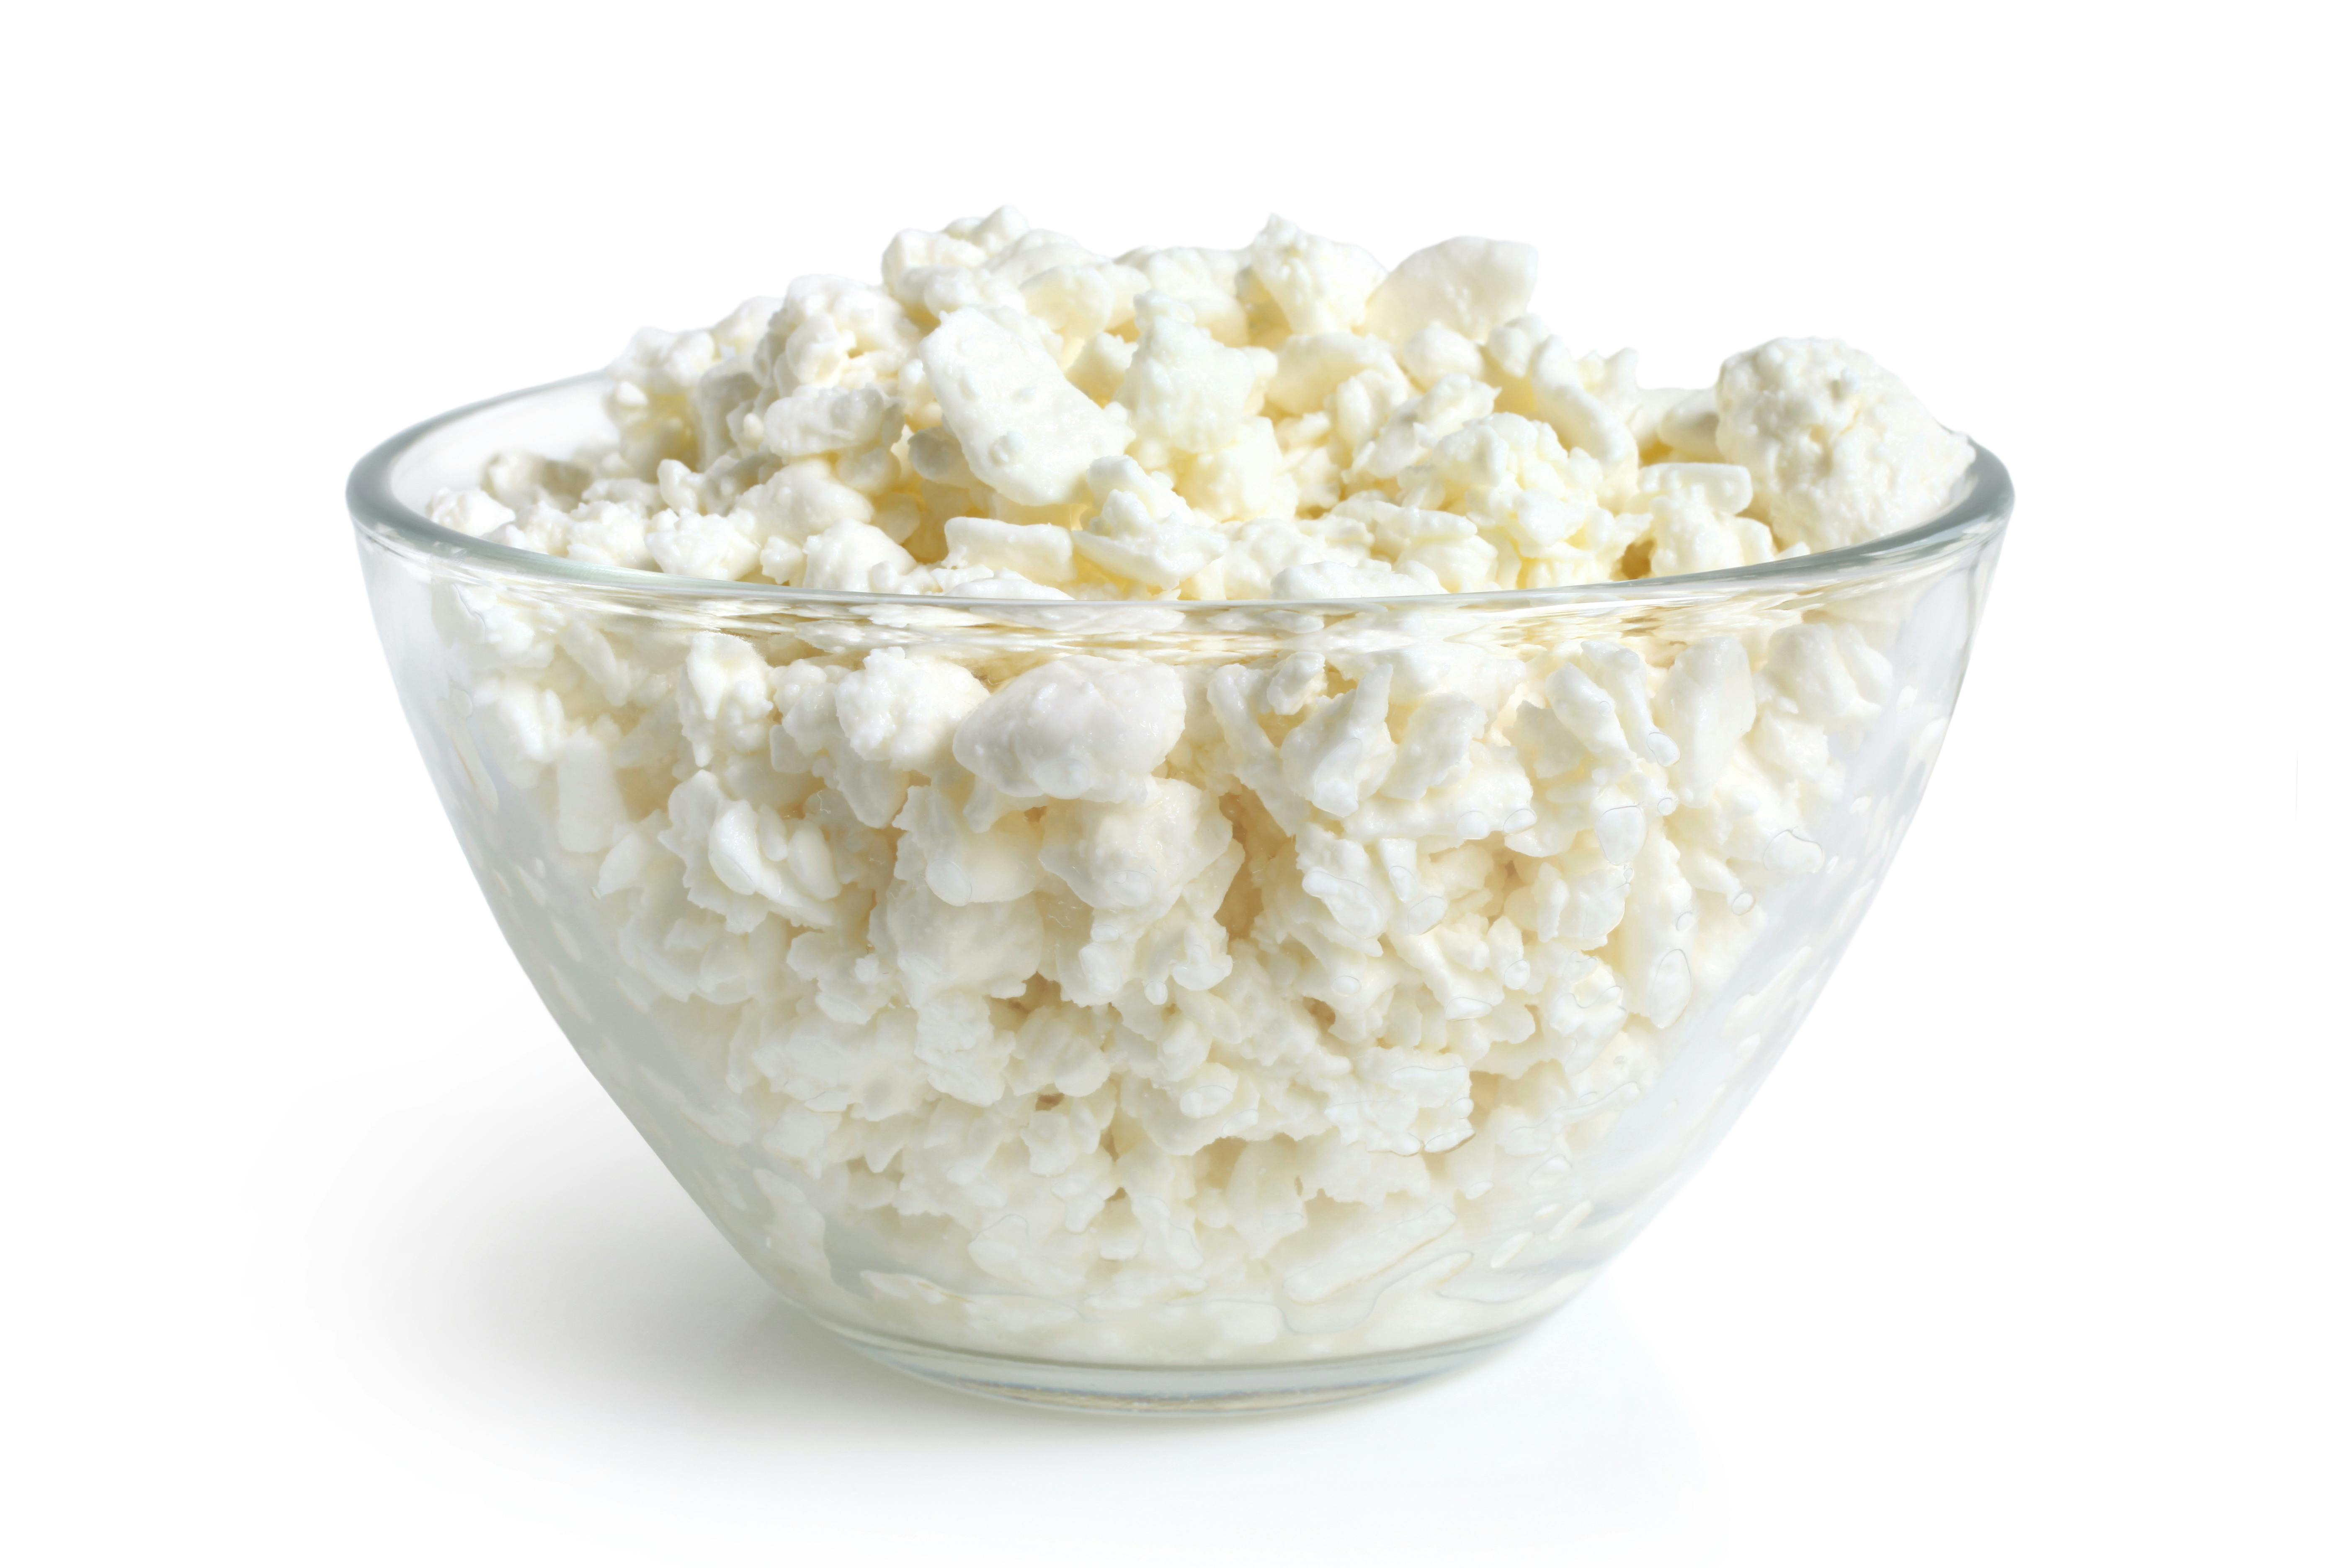  Cottage cheese